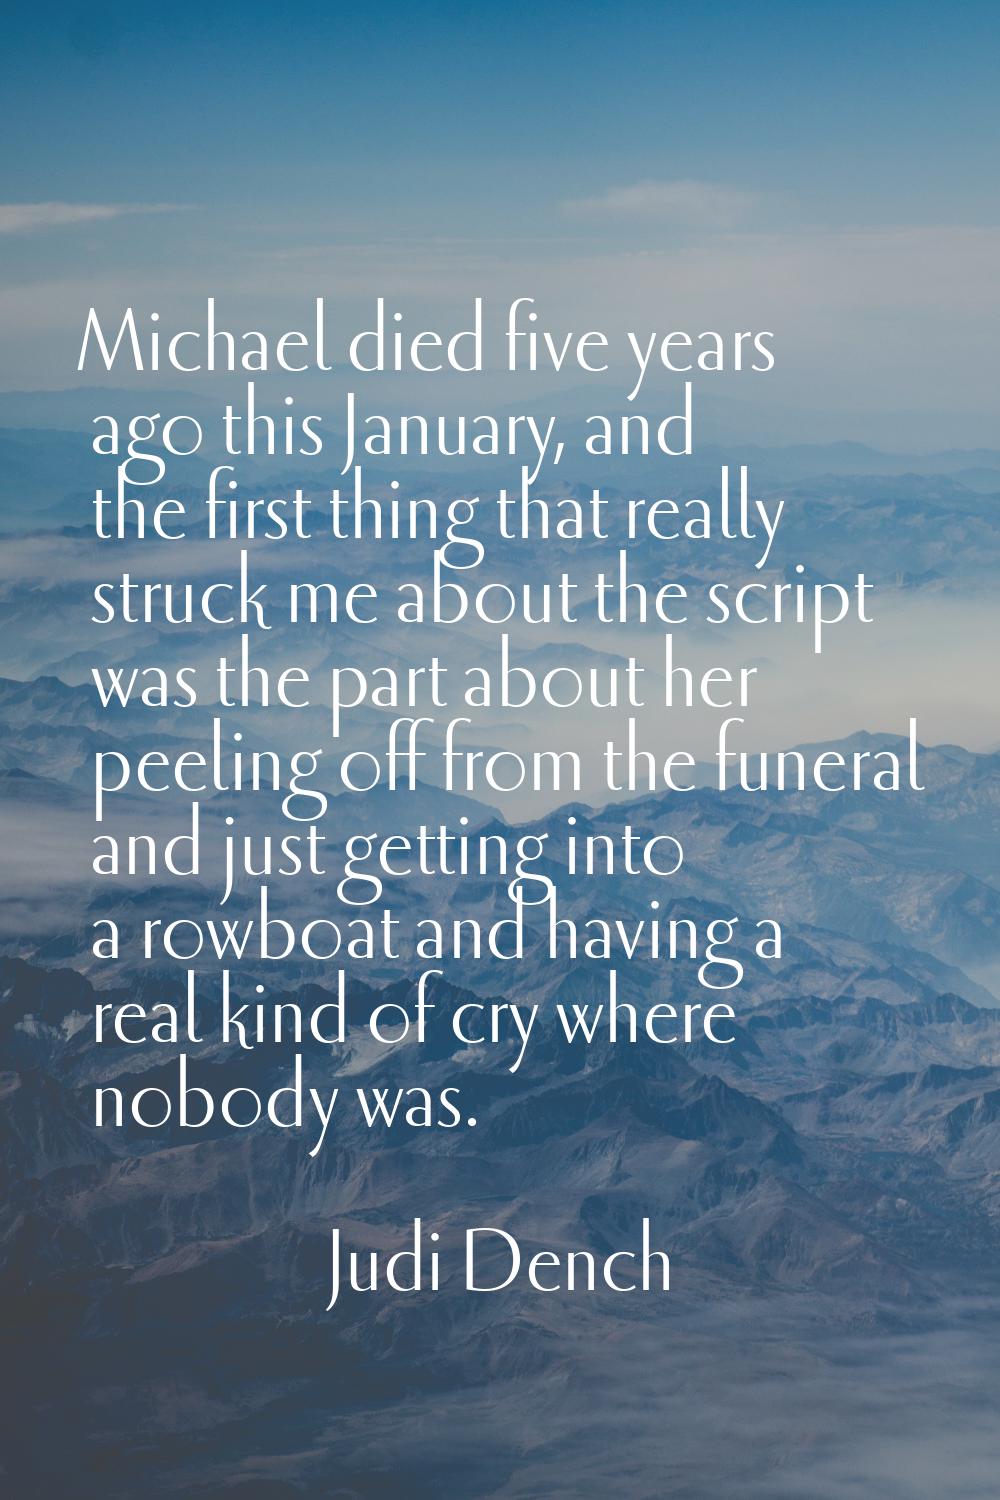 Michael died five years ago this January, and the first thing that really struck me about the scrip